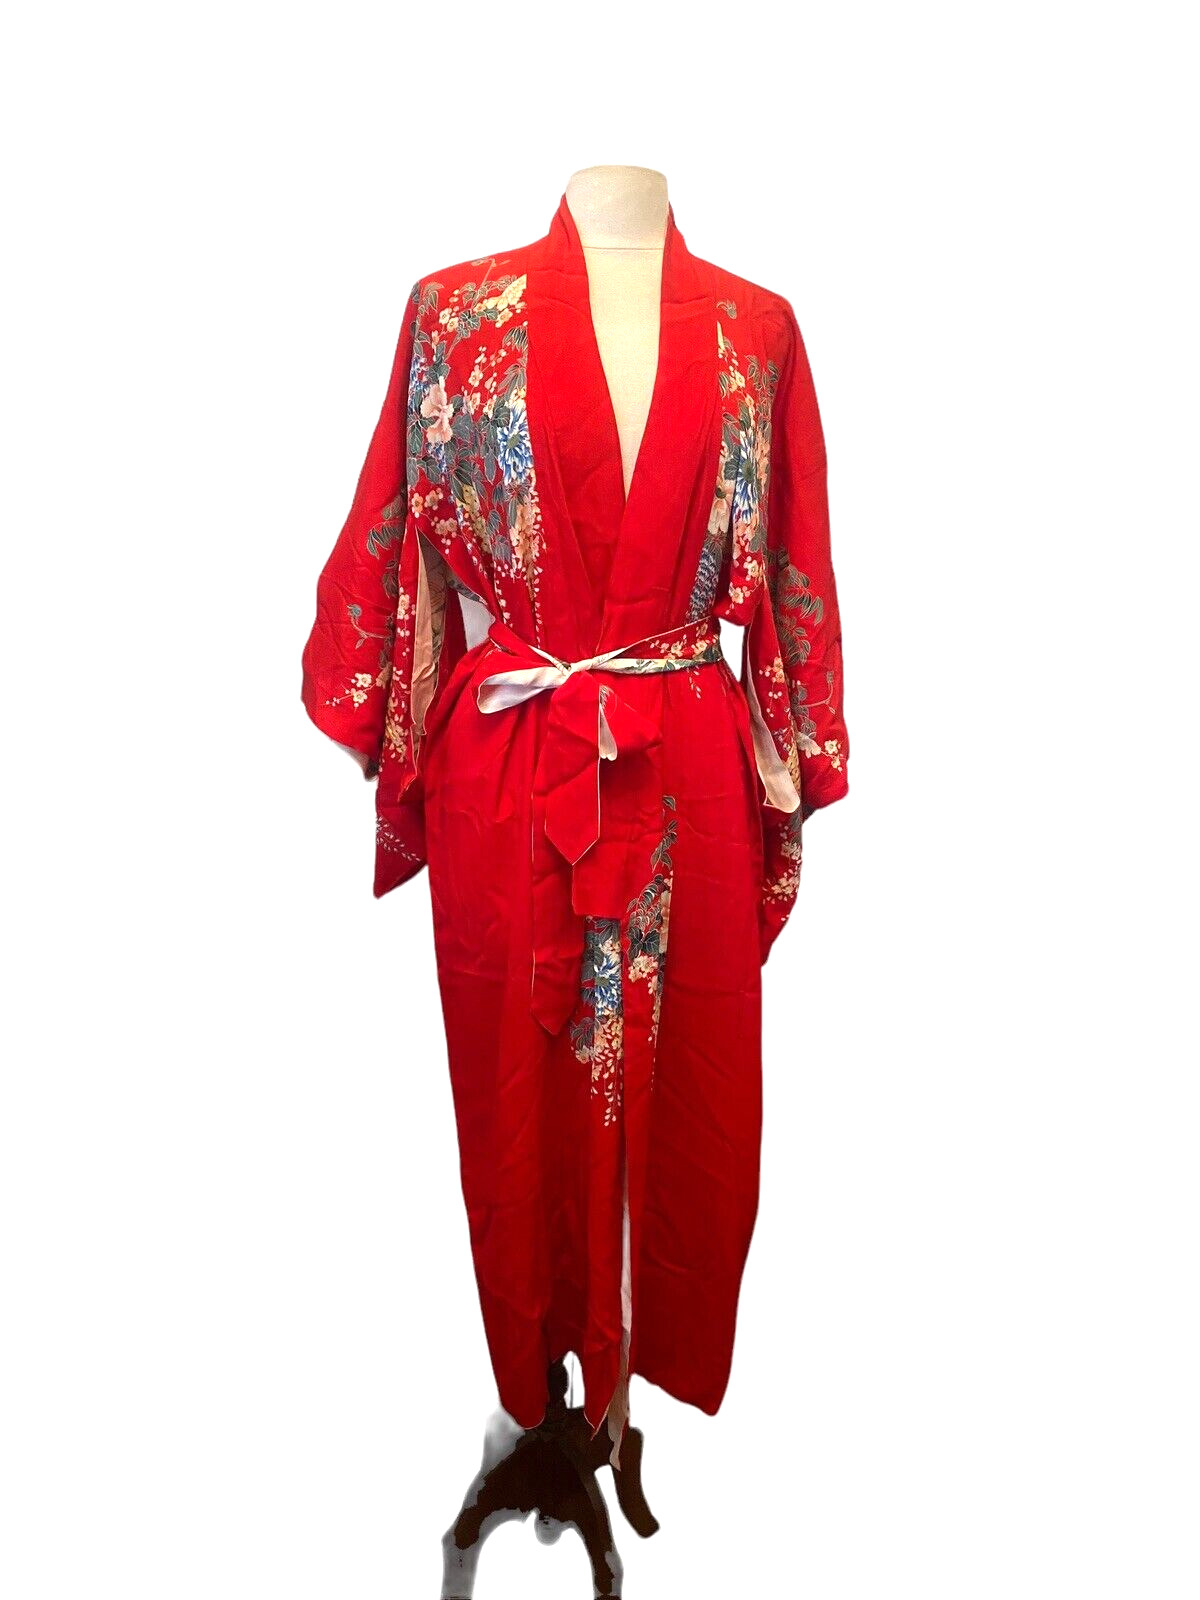 JAPANESE KIMONO WOMEN\'S REVERSABLE ROBE GOWN AUTHENTIC MADE IN JAPAN VINTAGE